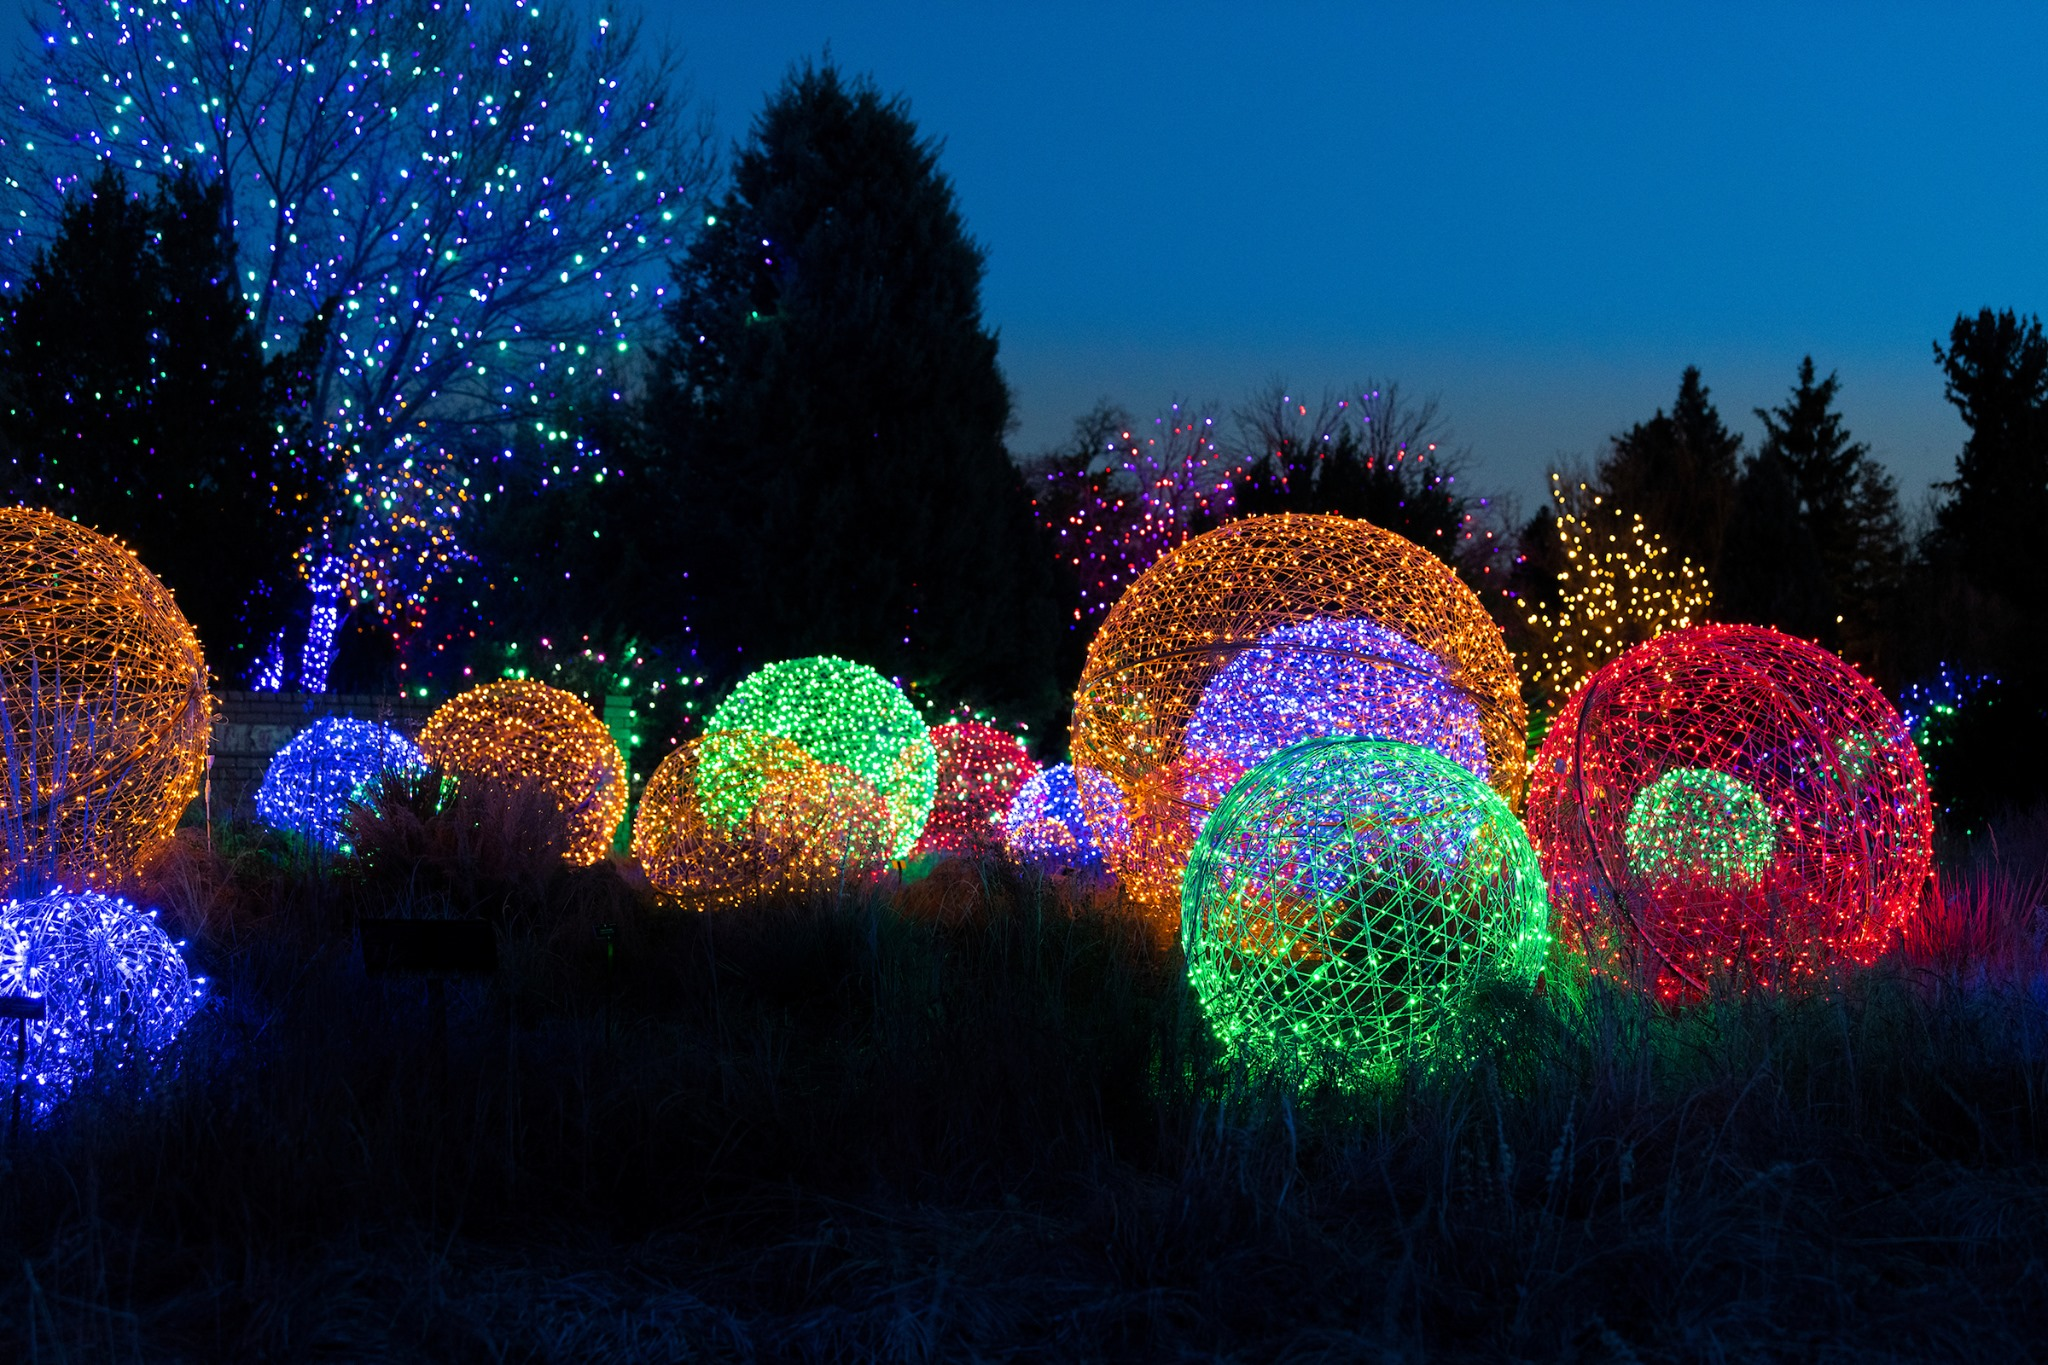 Colorful displays at Blossoms of Light, a winter festival at the Denver Botanic Gardens 